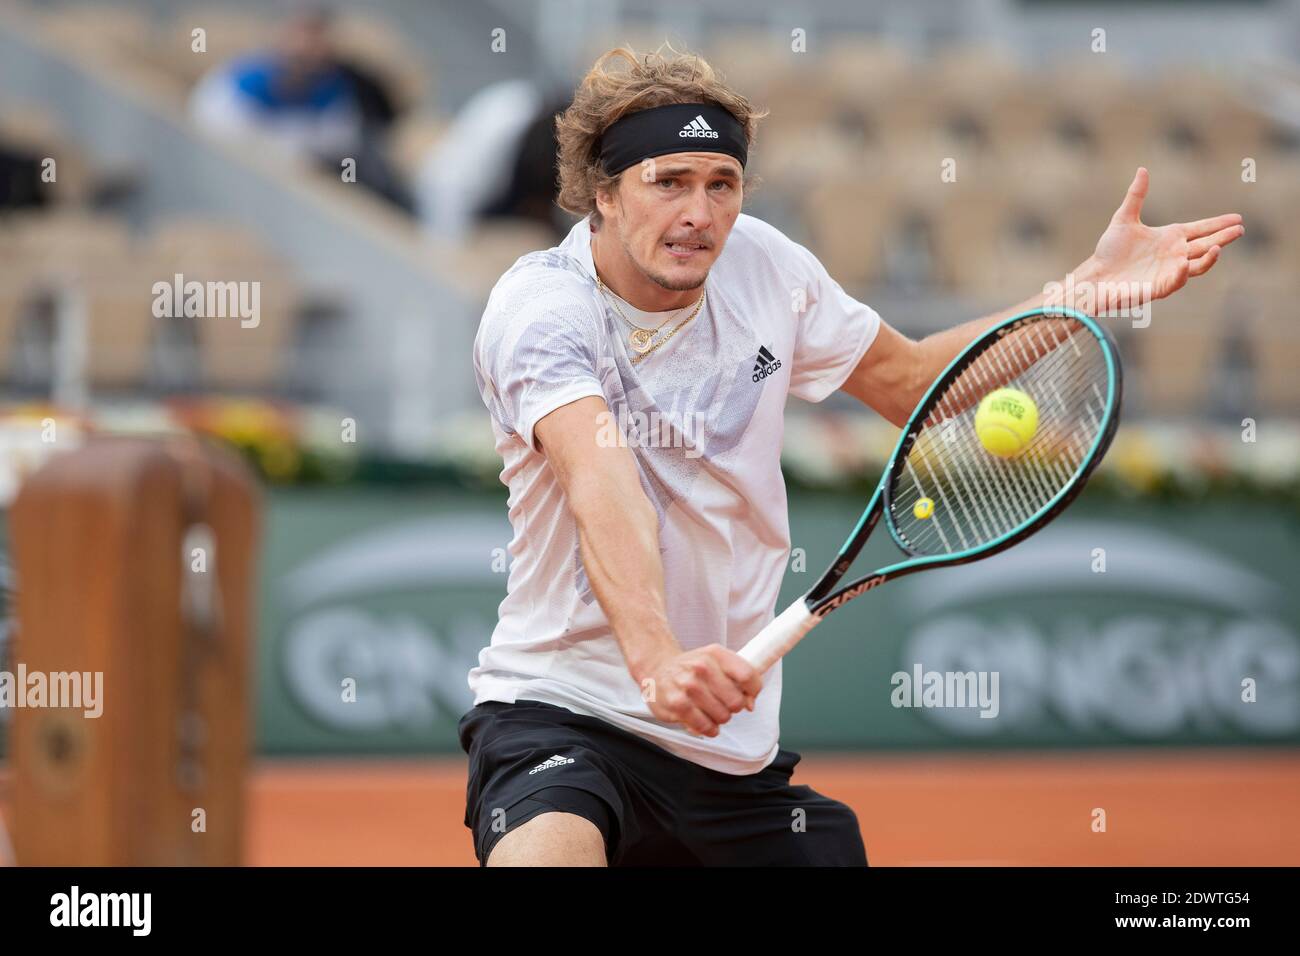 German tennis player Alexander Zverev playing backhand volley during French Open 2020,Paris, France,Europe. Stock Photo